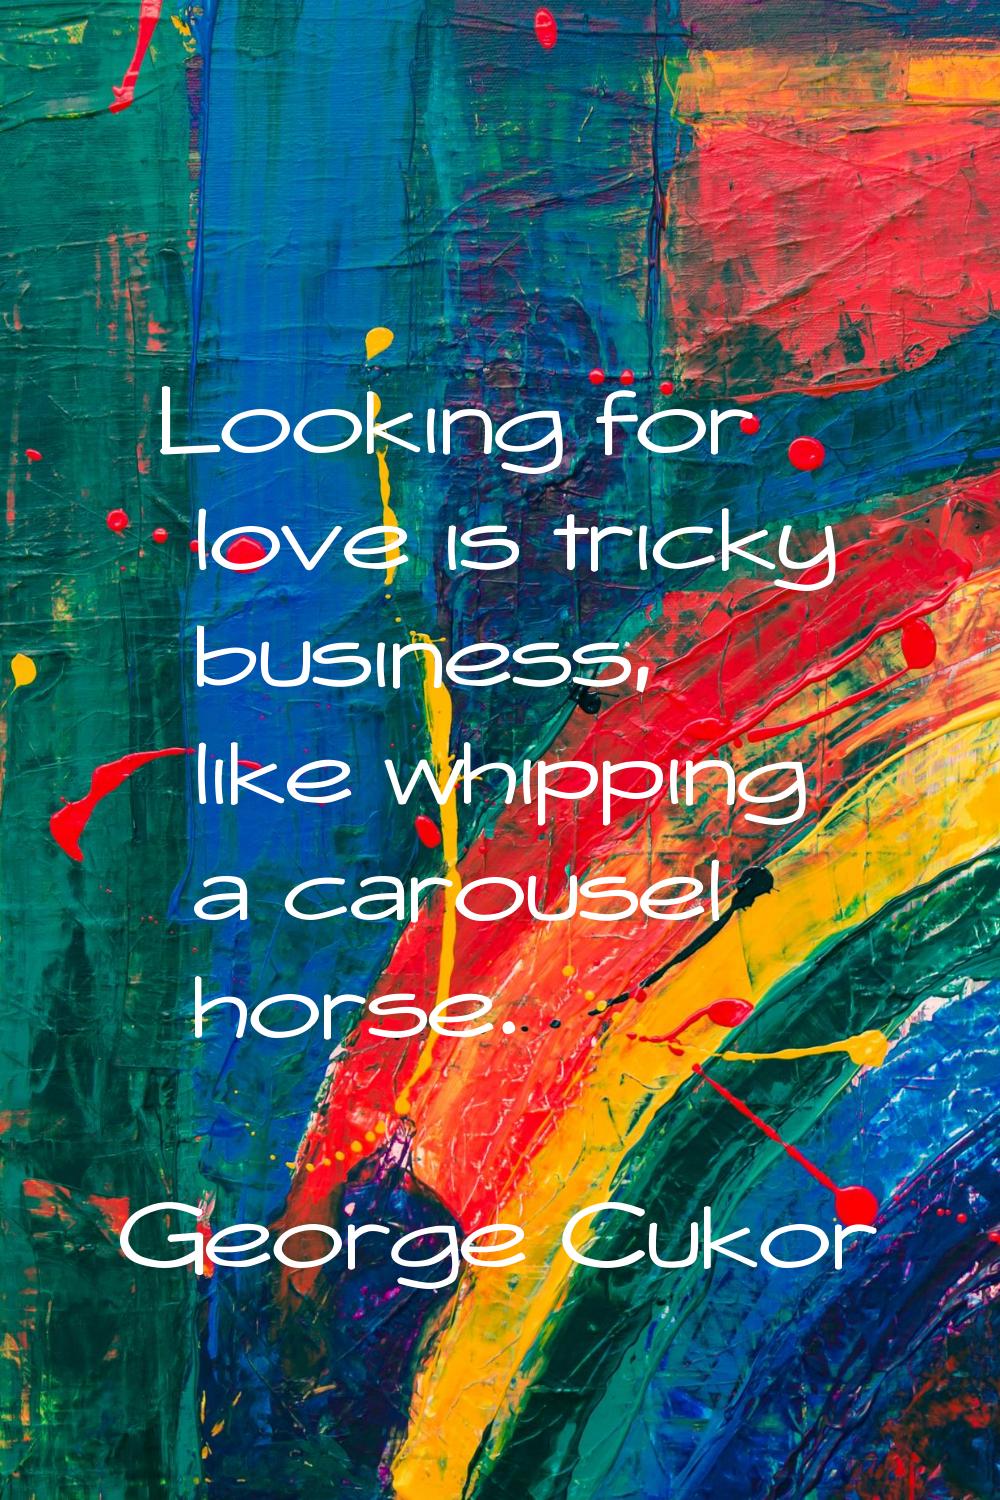 Looking for love is tricky business, like whipping a carousel horse.